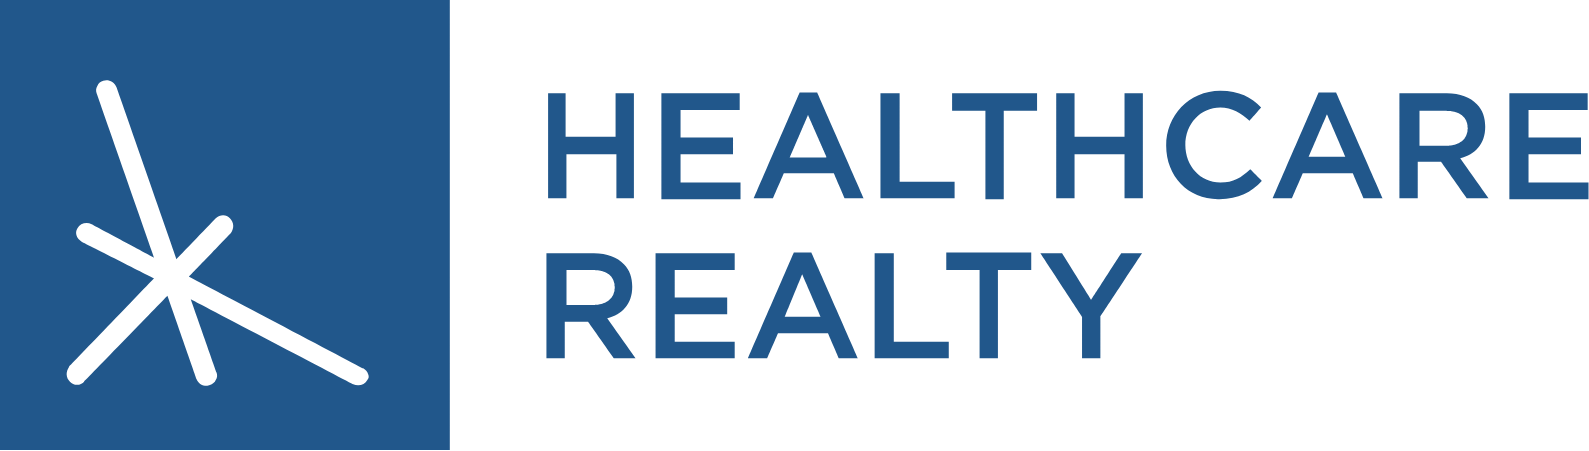 Healthcare Realty logo large (transparent PNG)